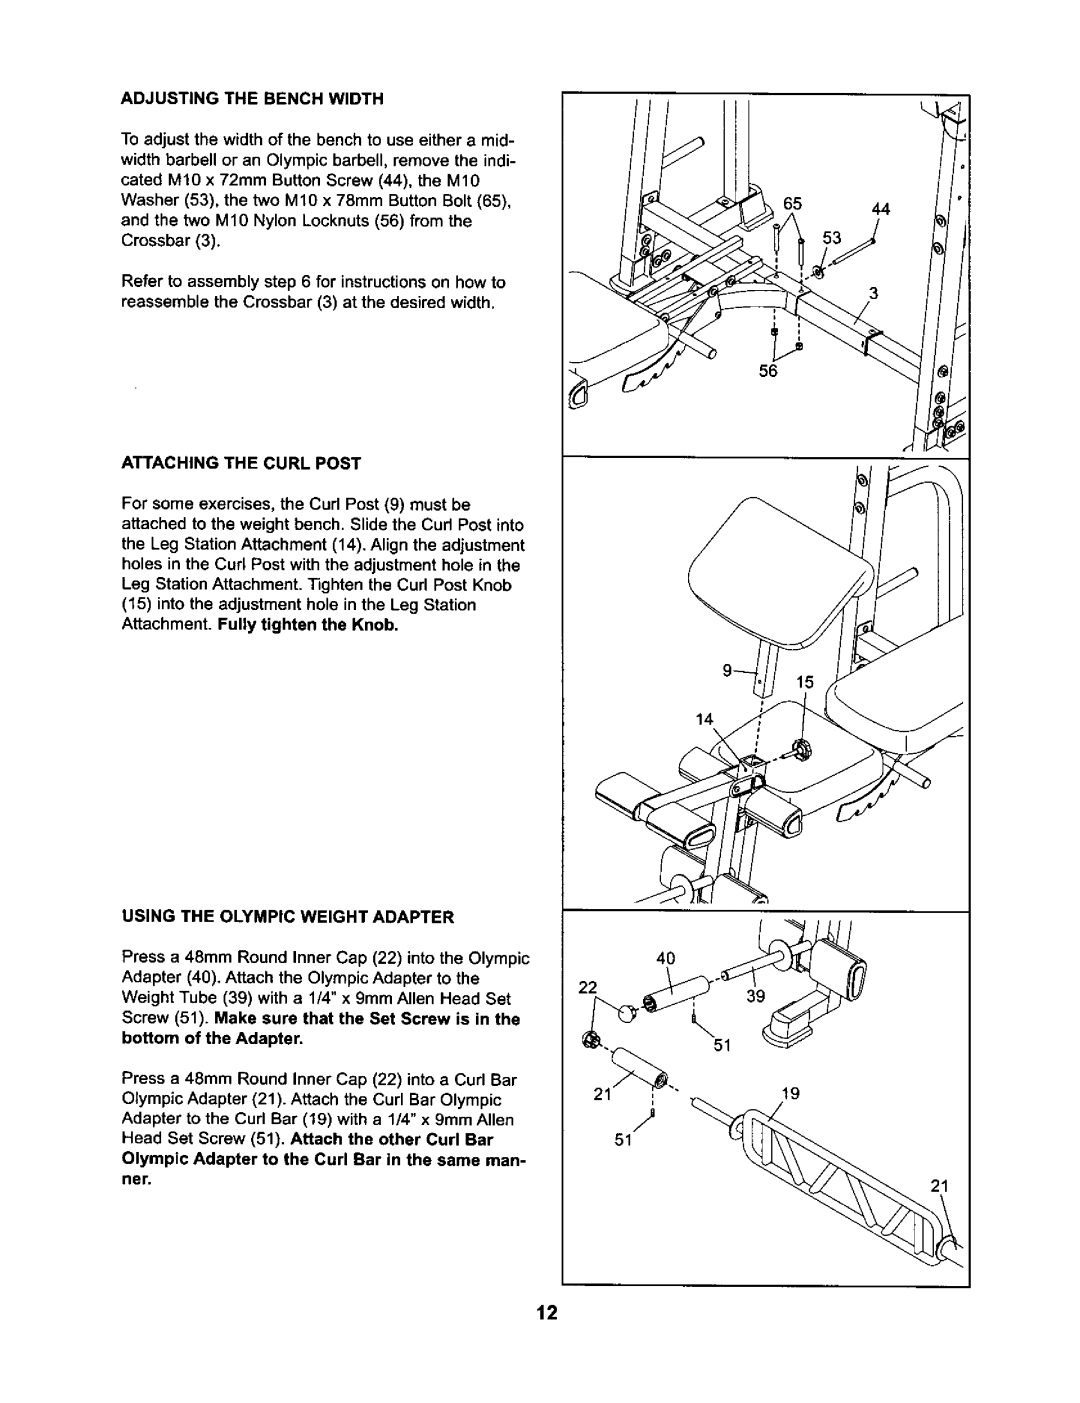 ProForm 831.15032 user manual Adjusting The Bench Width, Attaching The Curl Post, Attachment. Fully tighten the Knob 